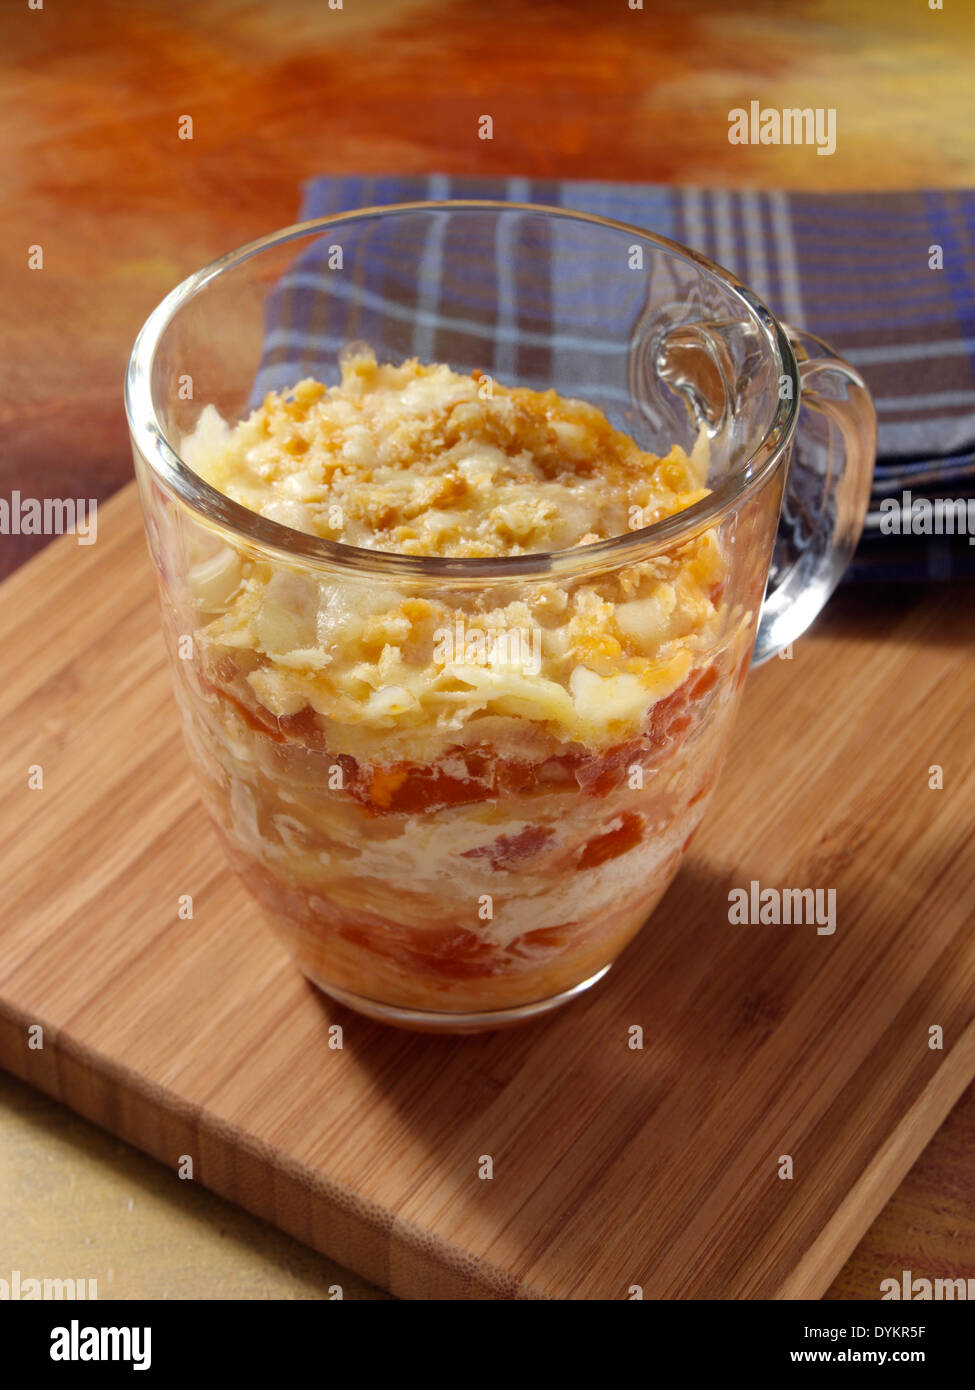 Parsnip tomato slices meal microwaved in a mug Stock Photo